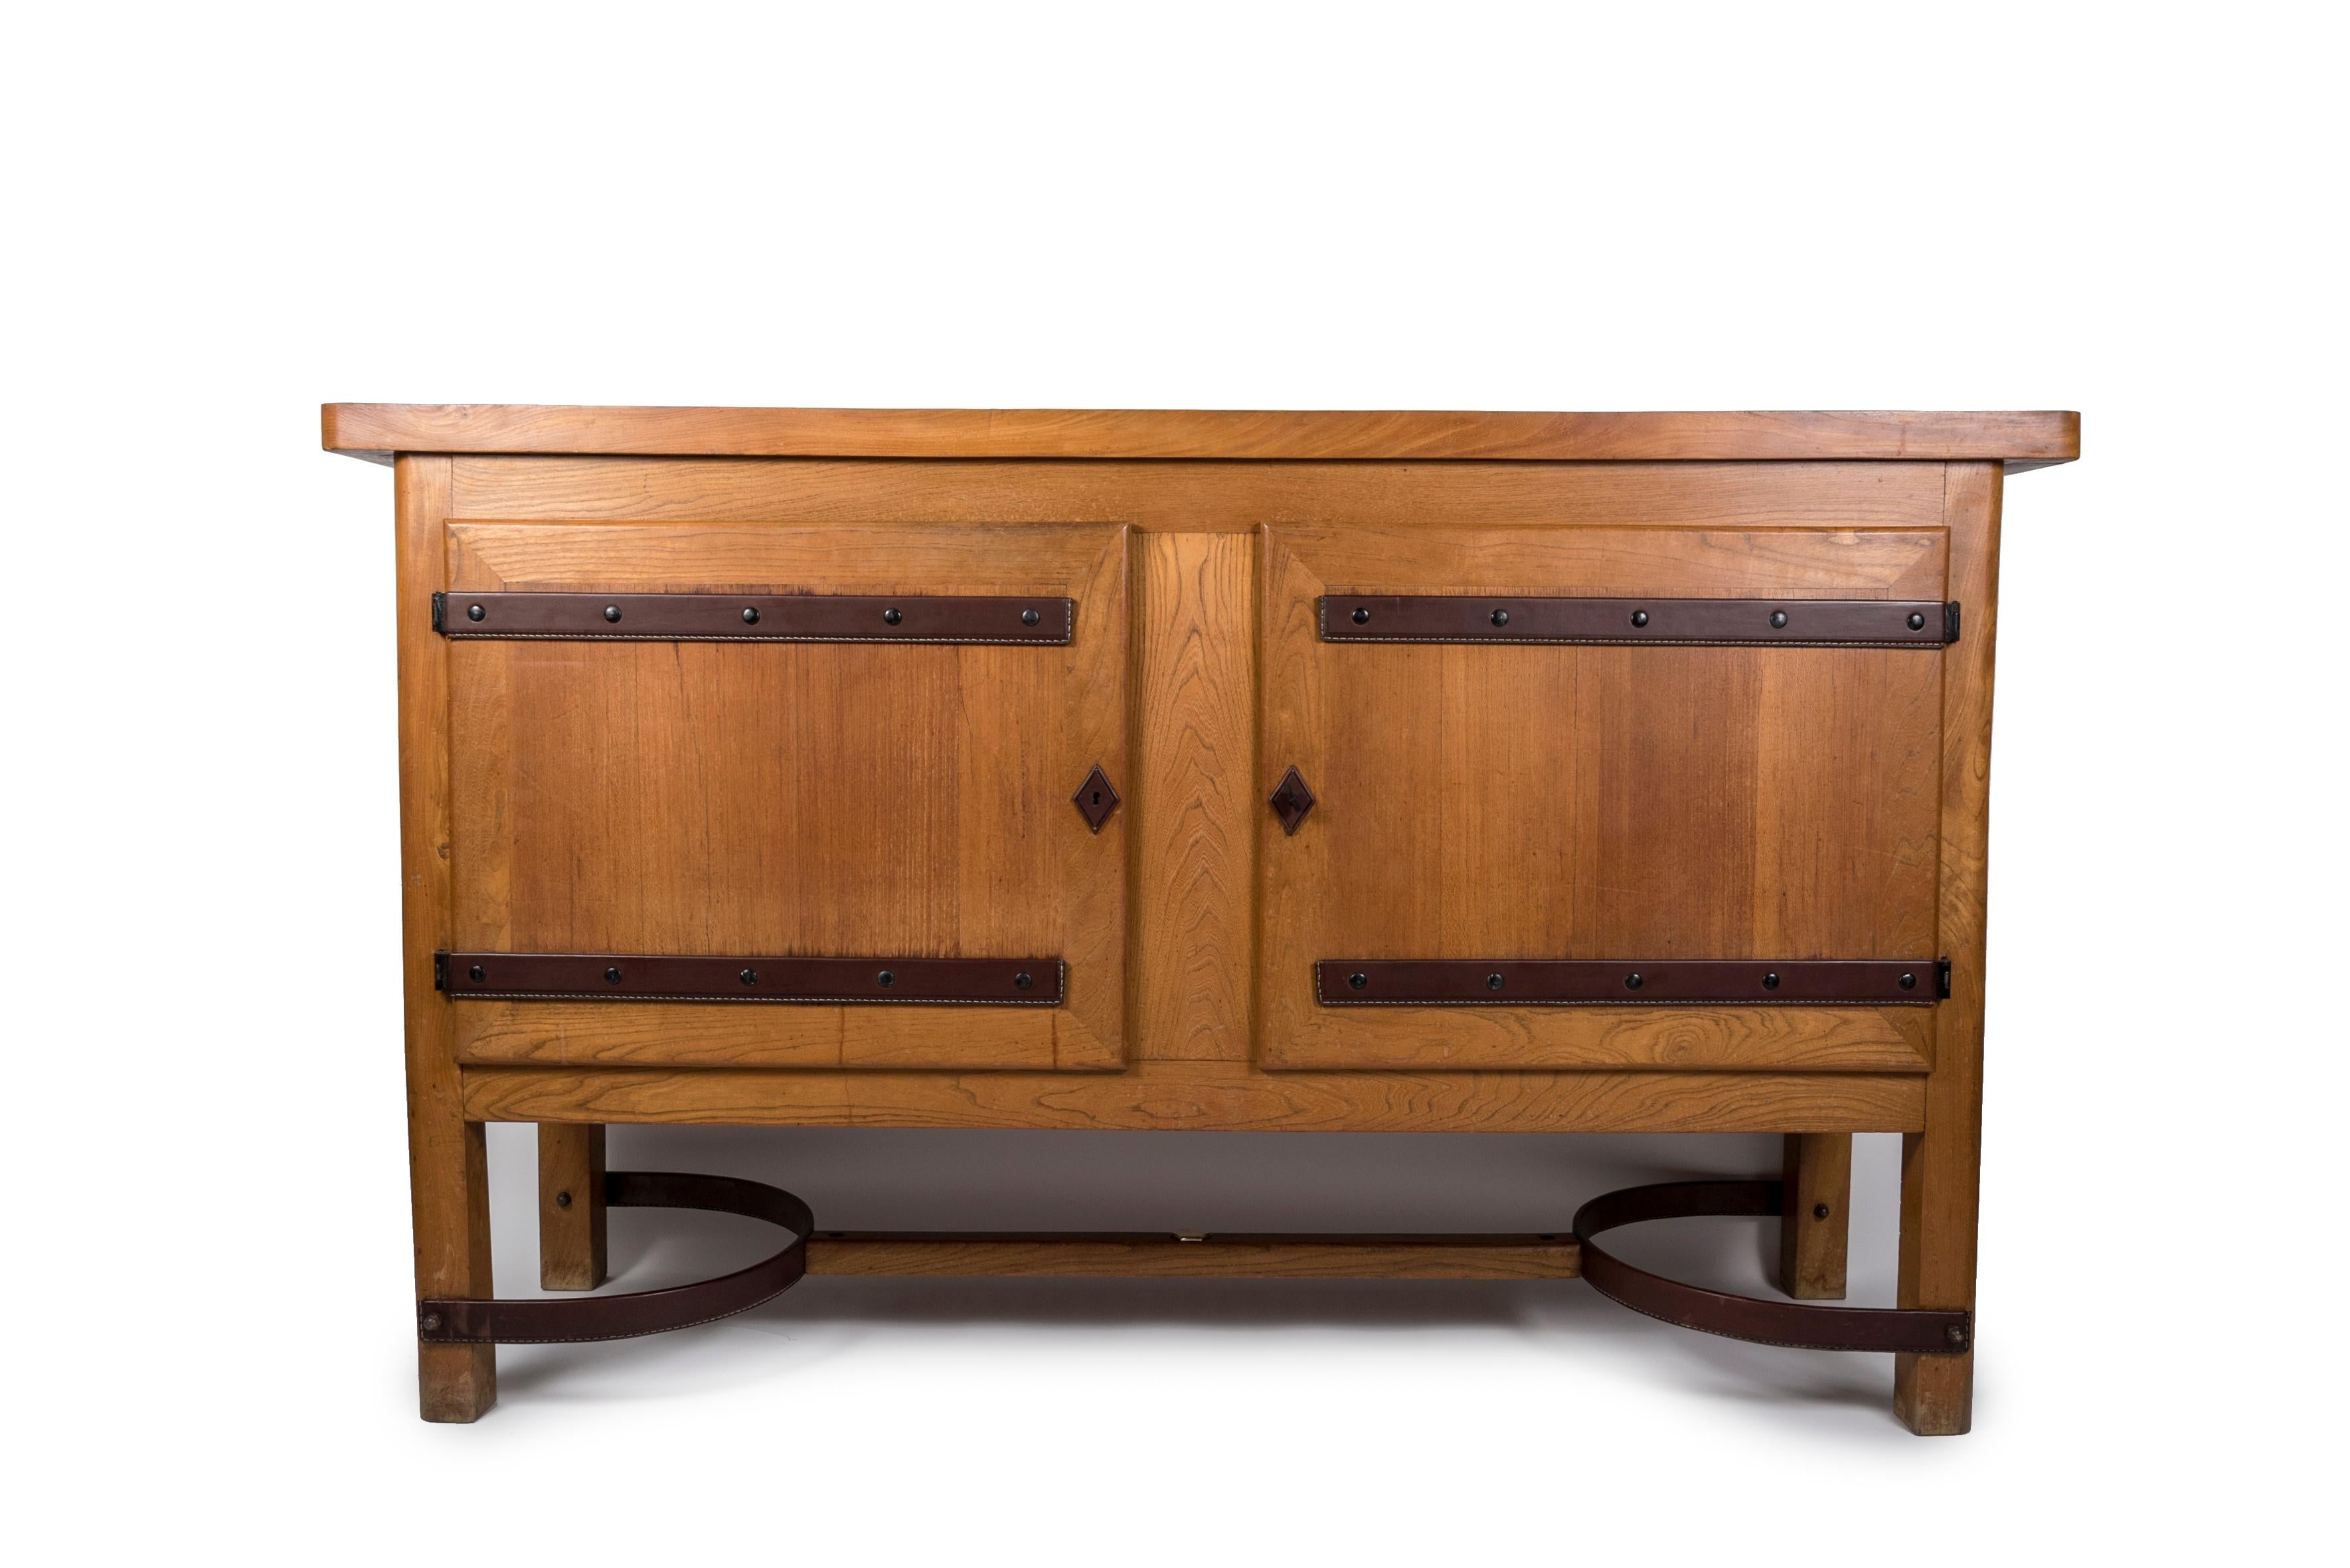 European 1950's Sideboard in Oak, Stitched Leather and Ceramic by Jacques Adnet For Sale